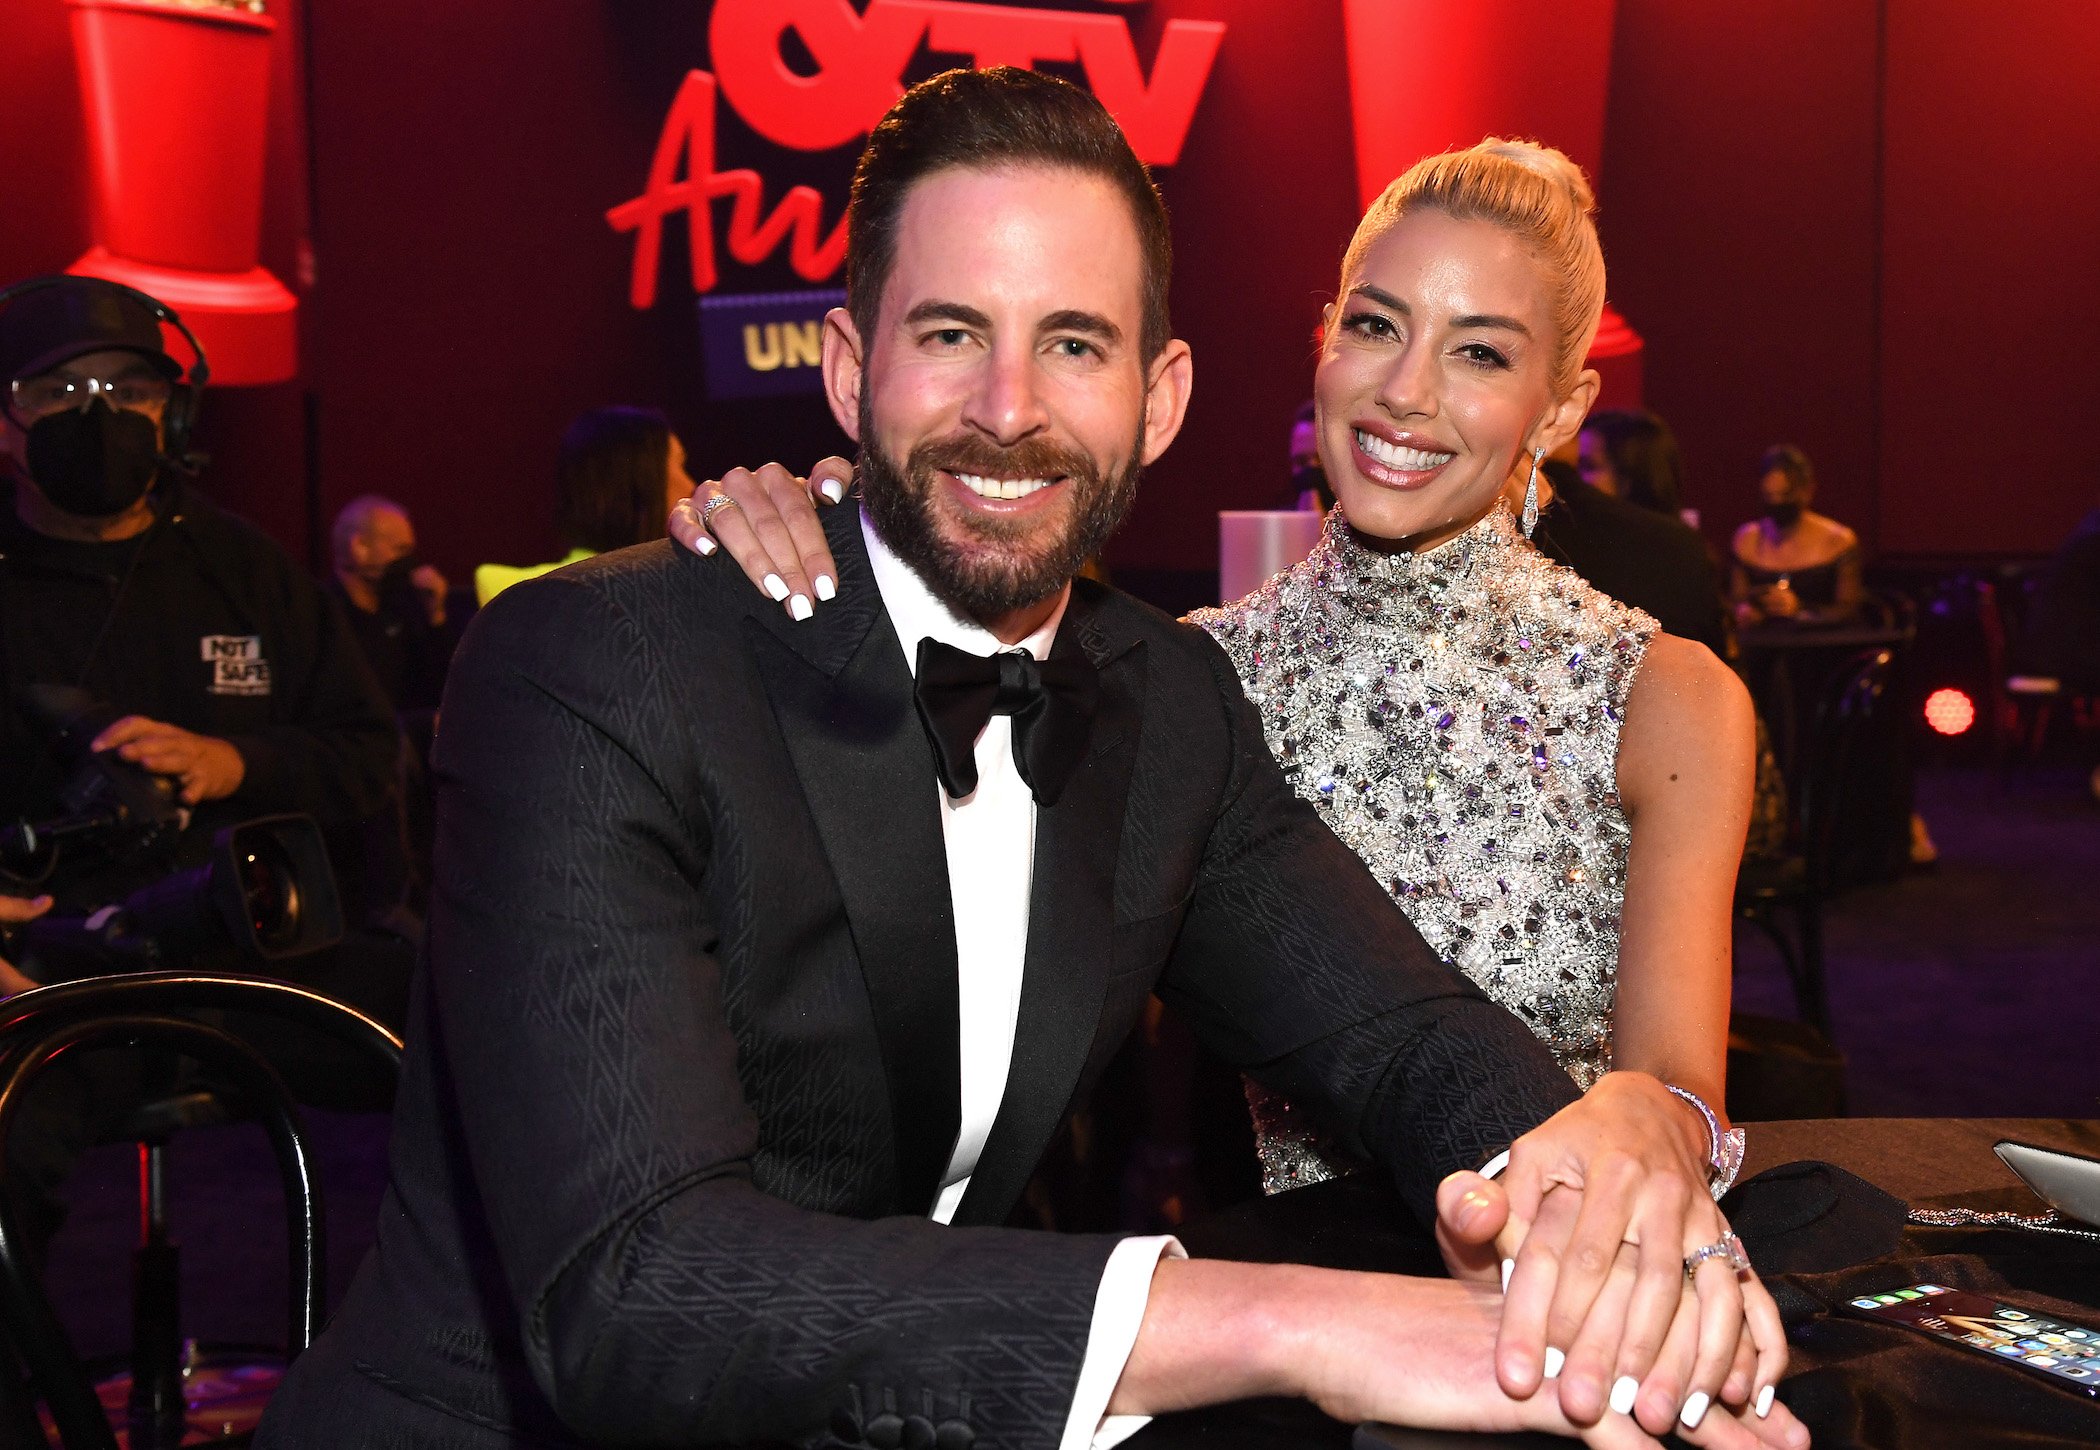 Heather Rae Young of 'Selling Sunset' Season 4 with her arm around Tarek El Moussa at the MTV Movie and TV Awards